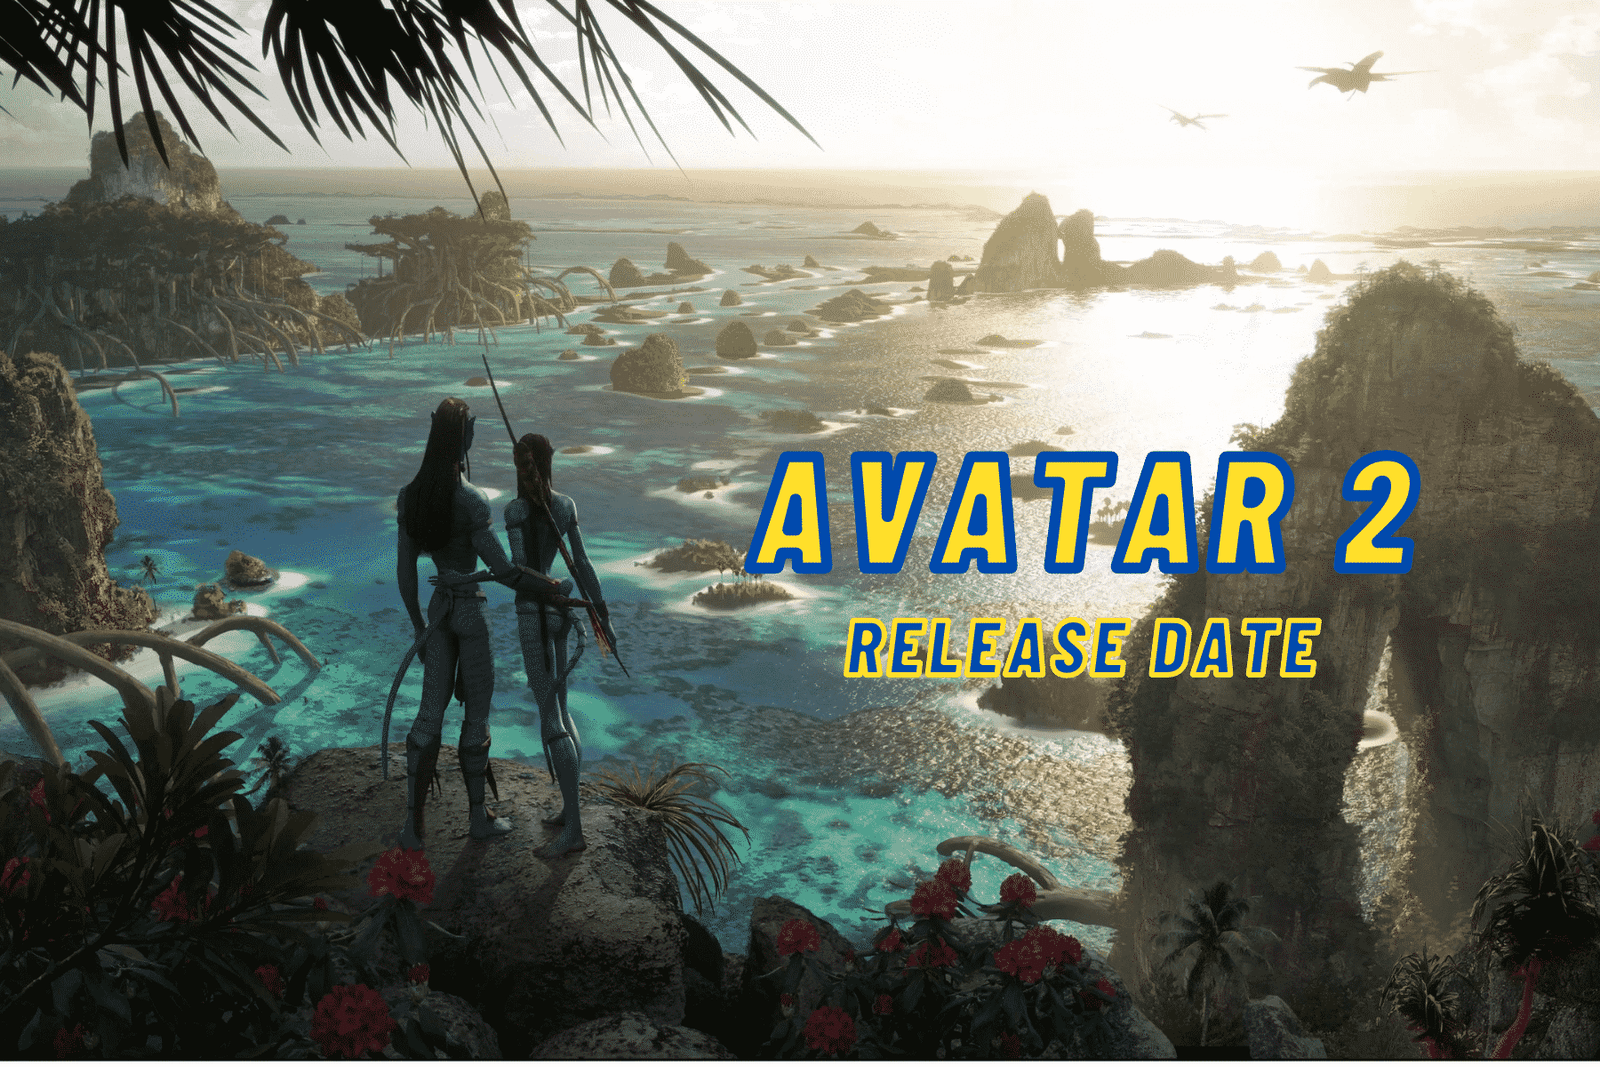 Avatar 2 2022 Release Date, Trailer - Is it Canceled?